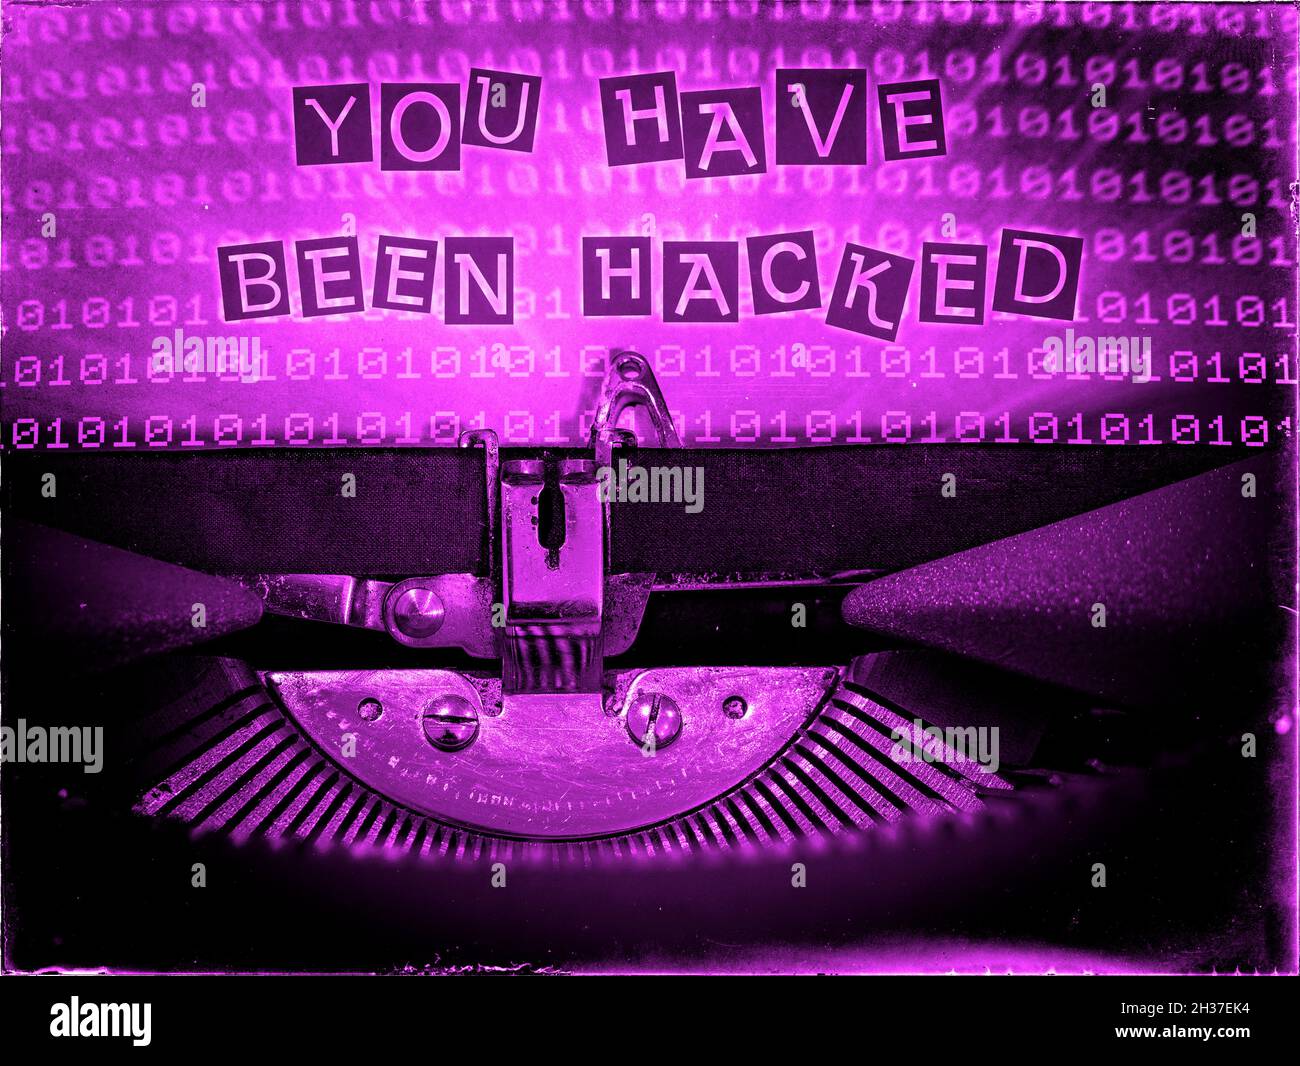 You have been hacked, Typewriter, Retrofuturism Stock Photo